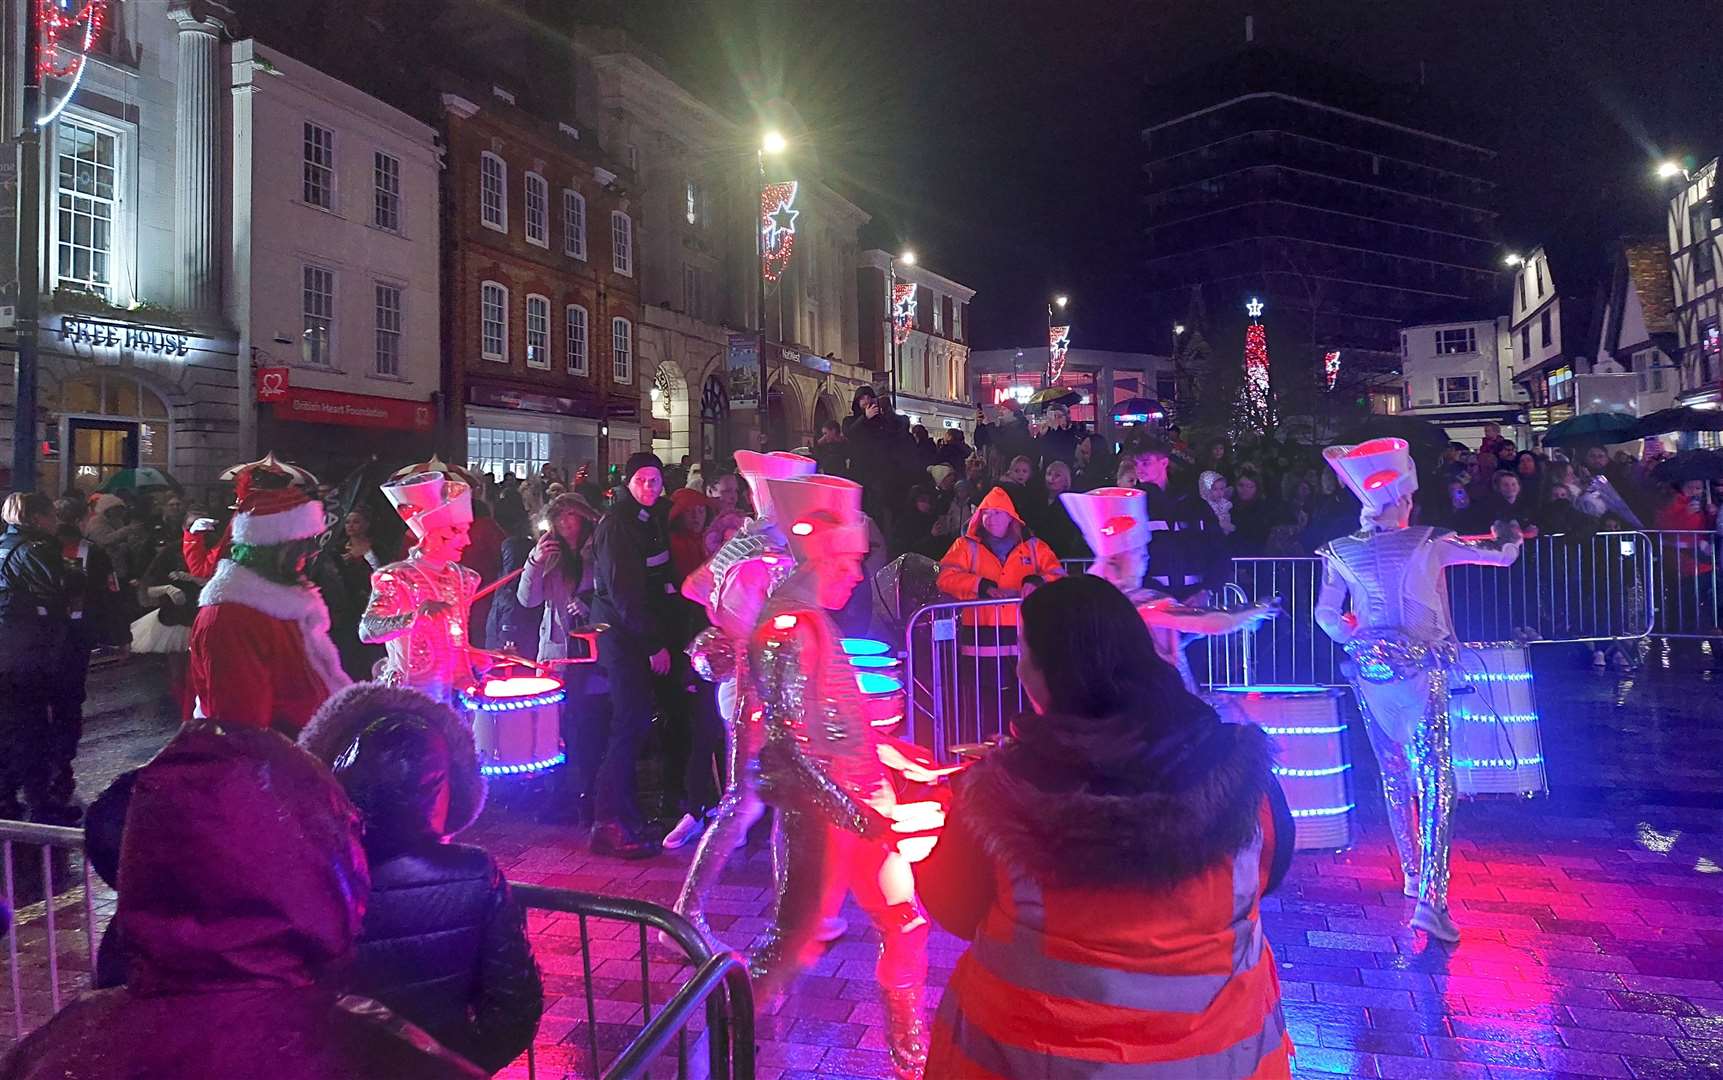 The magical parade finished at the Town Hall in Jubilee Square